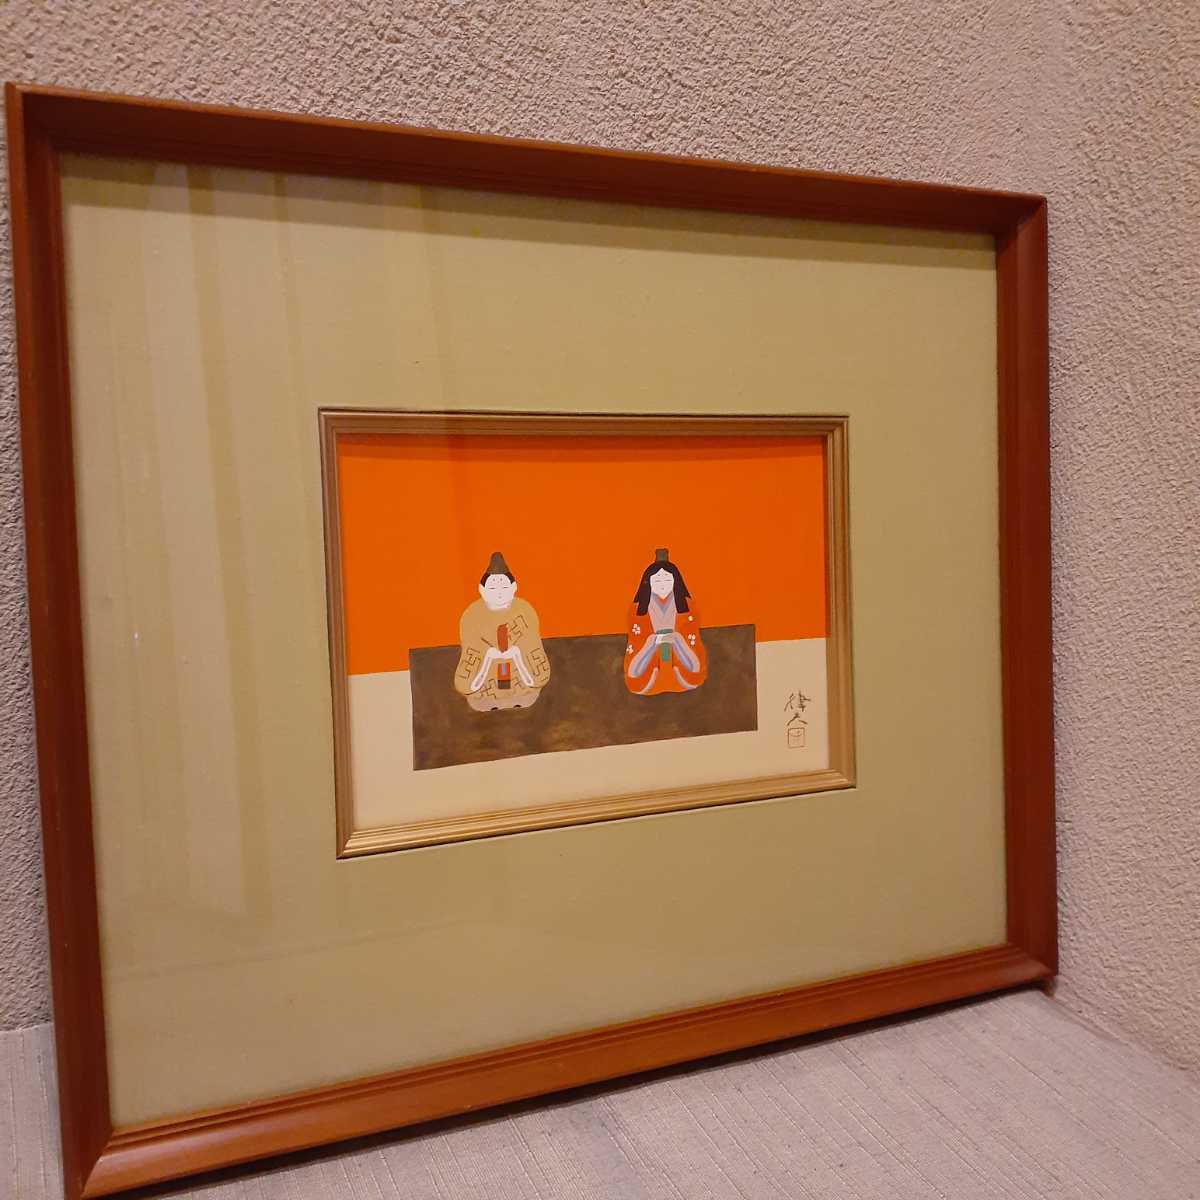 .. doll hinaningyo frame also seal approximately 43cm×35.5cm×3.5cm